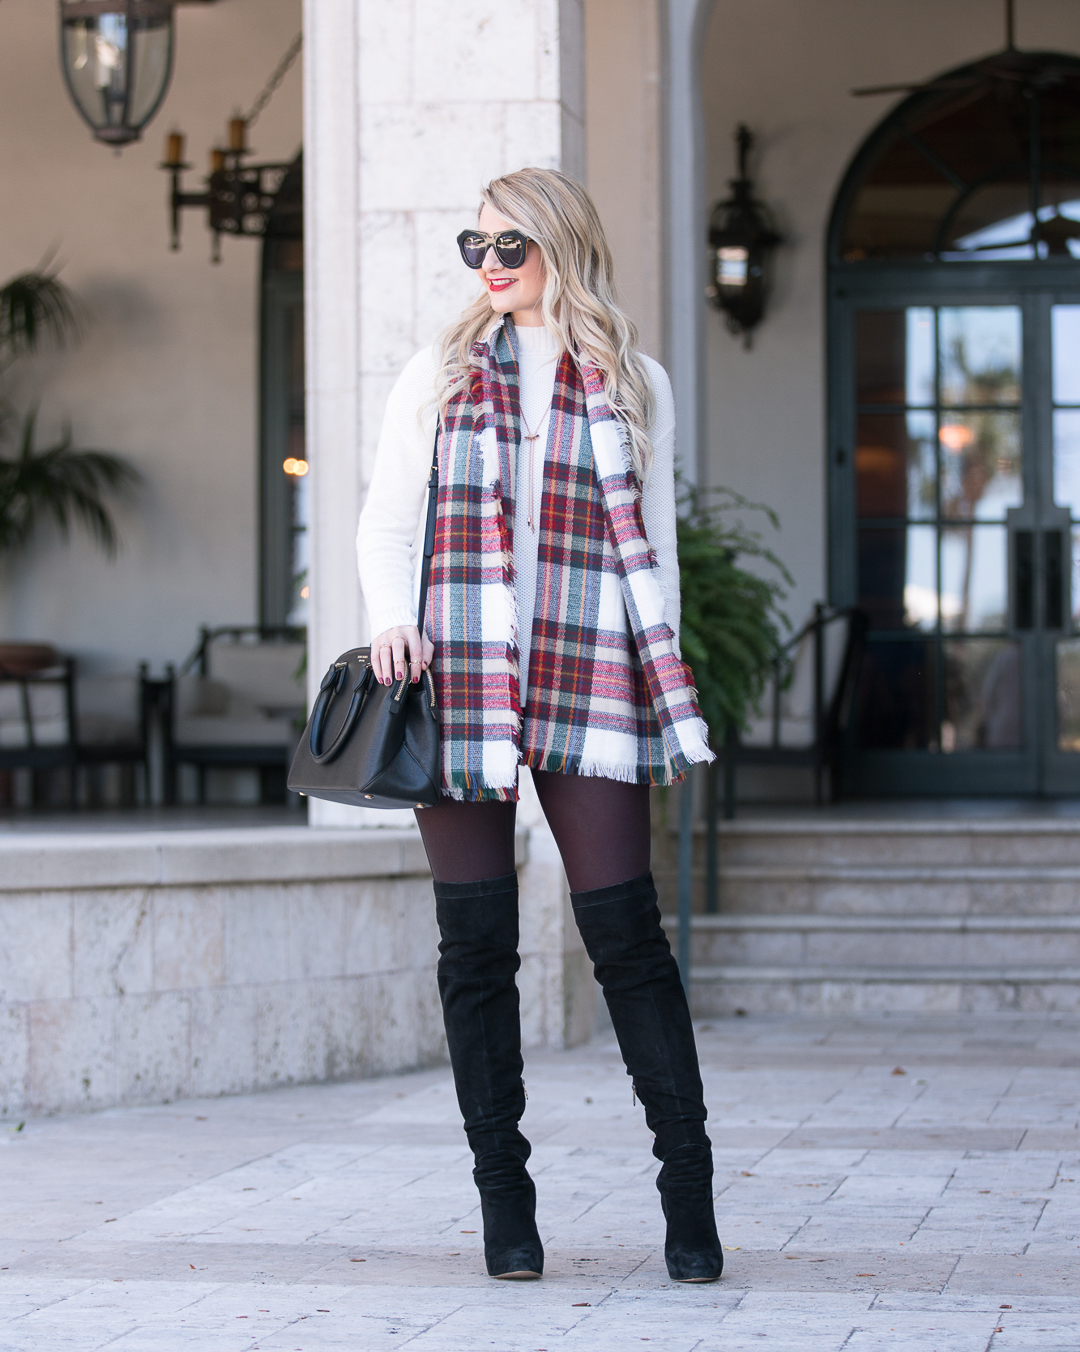 Jenna Colgrove from Visions of Vogue in a plaid blanket scarf, wine colored leggings, and black suede boots. 